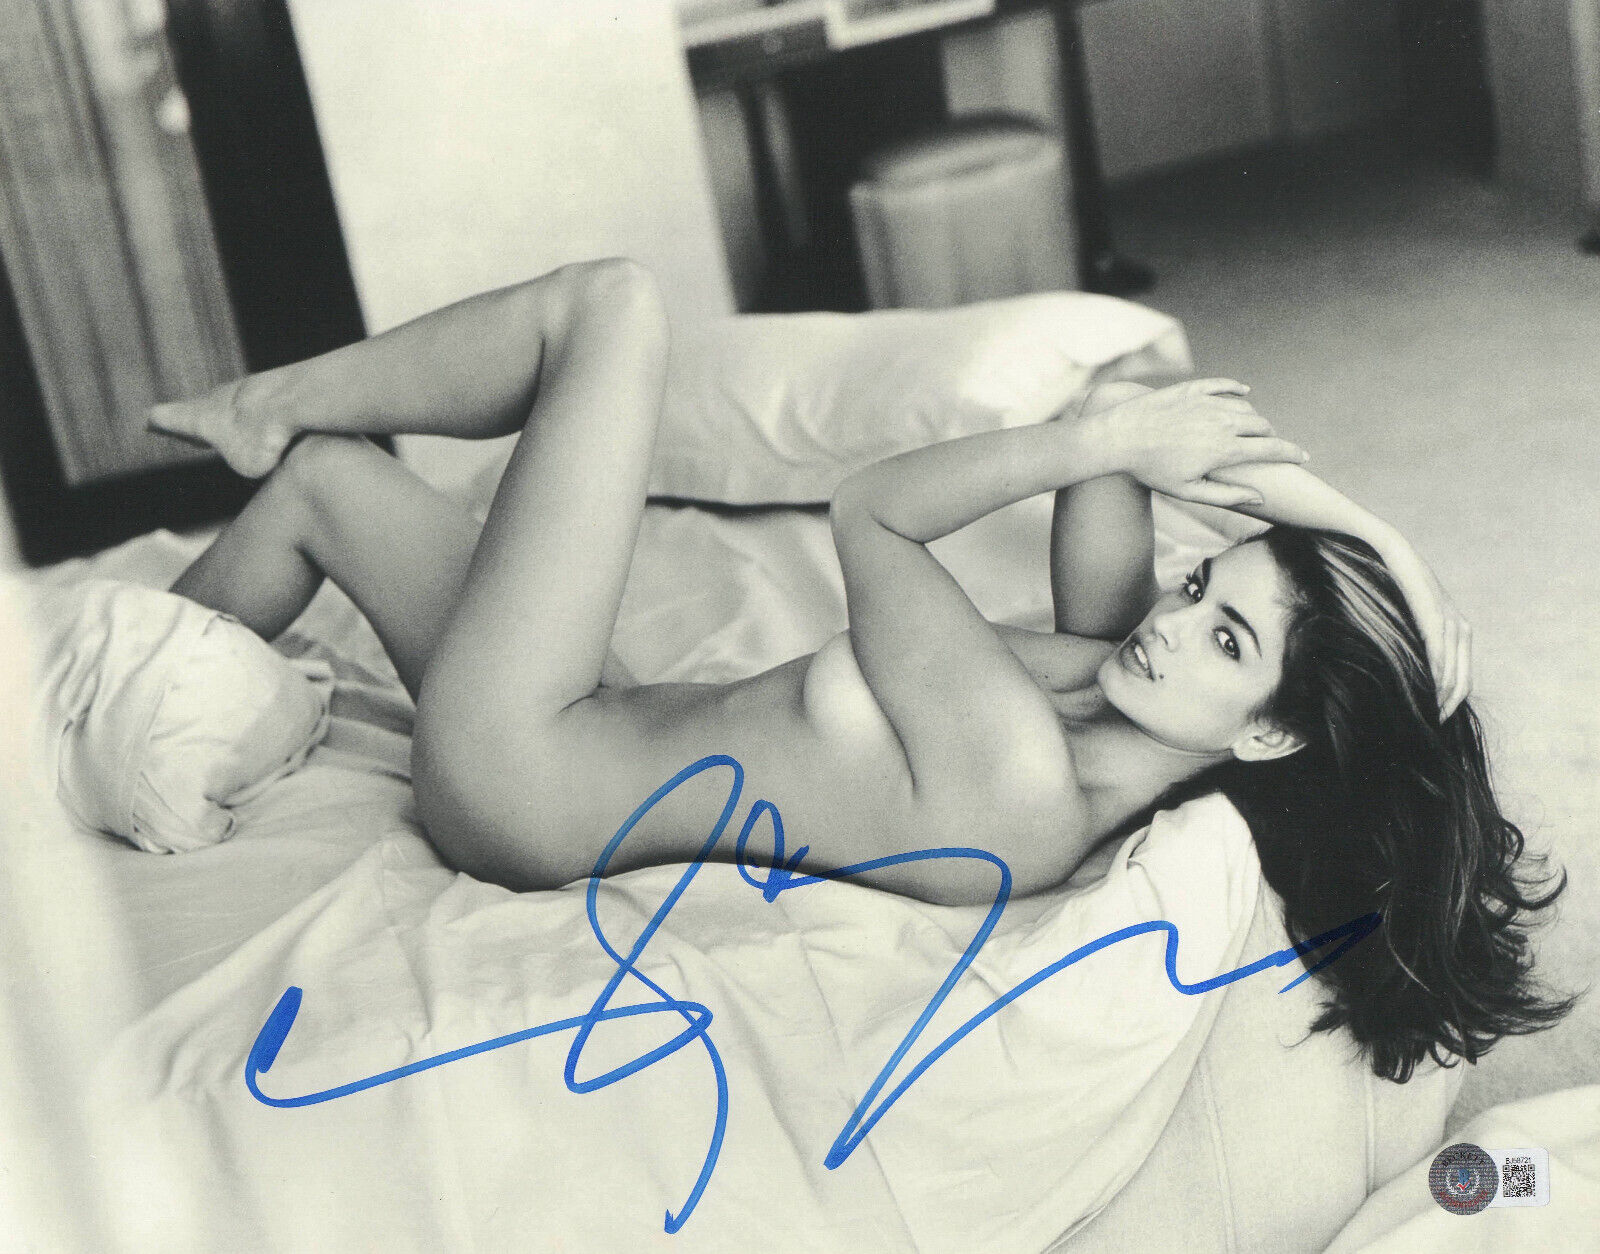 HOT SEXY CINDY CRAWFORD SIGNED 11X14 PHOTO AUTHENTIC AUTOGRAPH BAS BECKETT COA